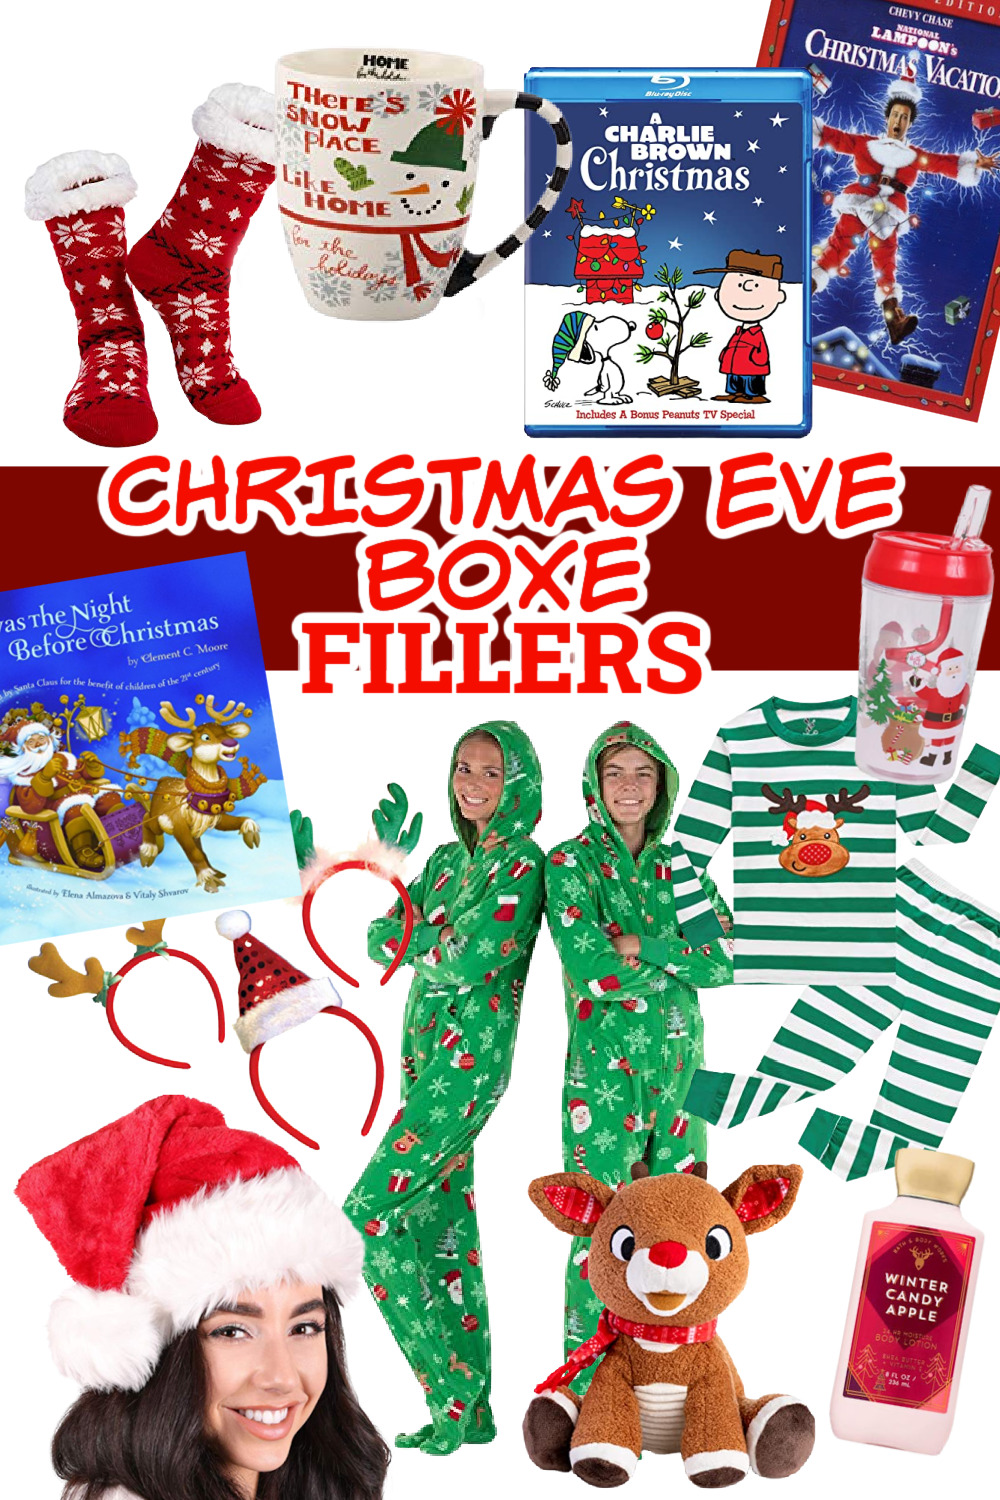 A collage of great Christmas Eve Box fillers for everyone in the family including adults!